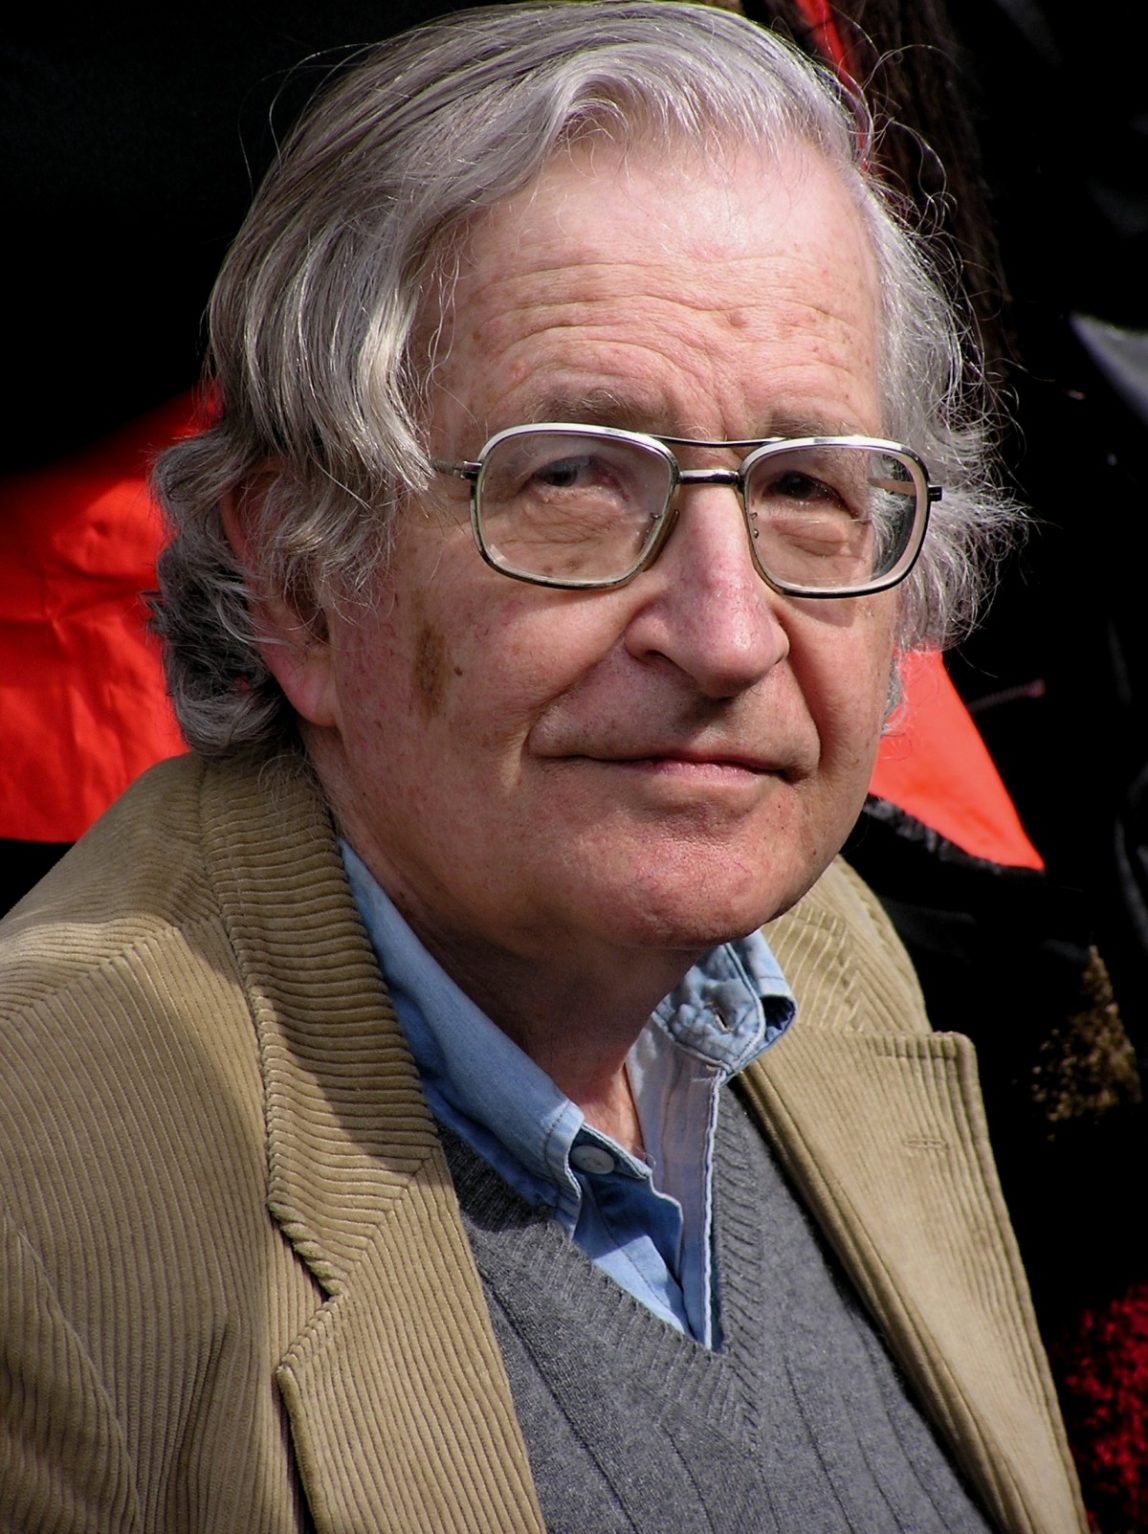 Noam Chomsky (pictured in 2012), who lives in the blue state of Massachusetts, said he would vote for Hillary Clinton if he lived in a swing state such as Ohio. | AP Photo